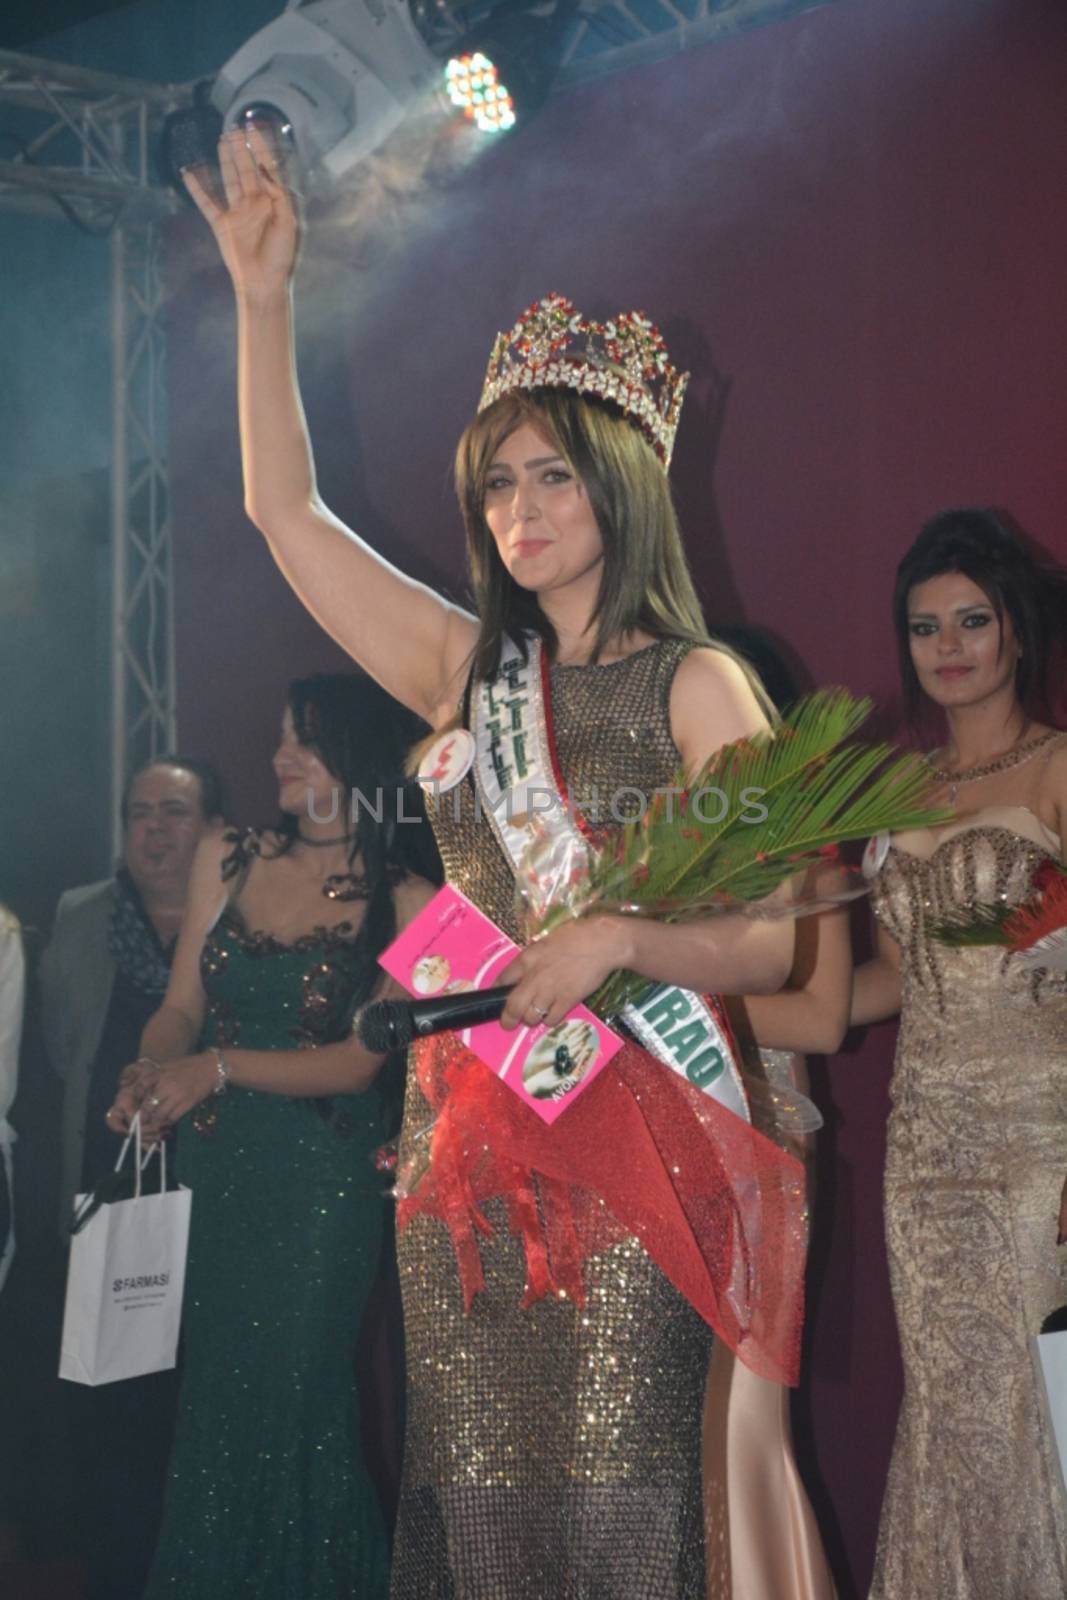 IRAQ, Baghdad: Shaymaa Abdelrahman is crowned Miss Iraq on December 18, 2015 in Baghdad. The 20-year-old, green-eyed knockout from Kirkuk is reportedly the first beauty queen to be chosen in Iraq since 1972. While Iraq is most often depicted as a contentious, war-torn area on the geopolitical landscape, this pageant is a means to show the world that many Iraqis still love life at home.